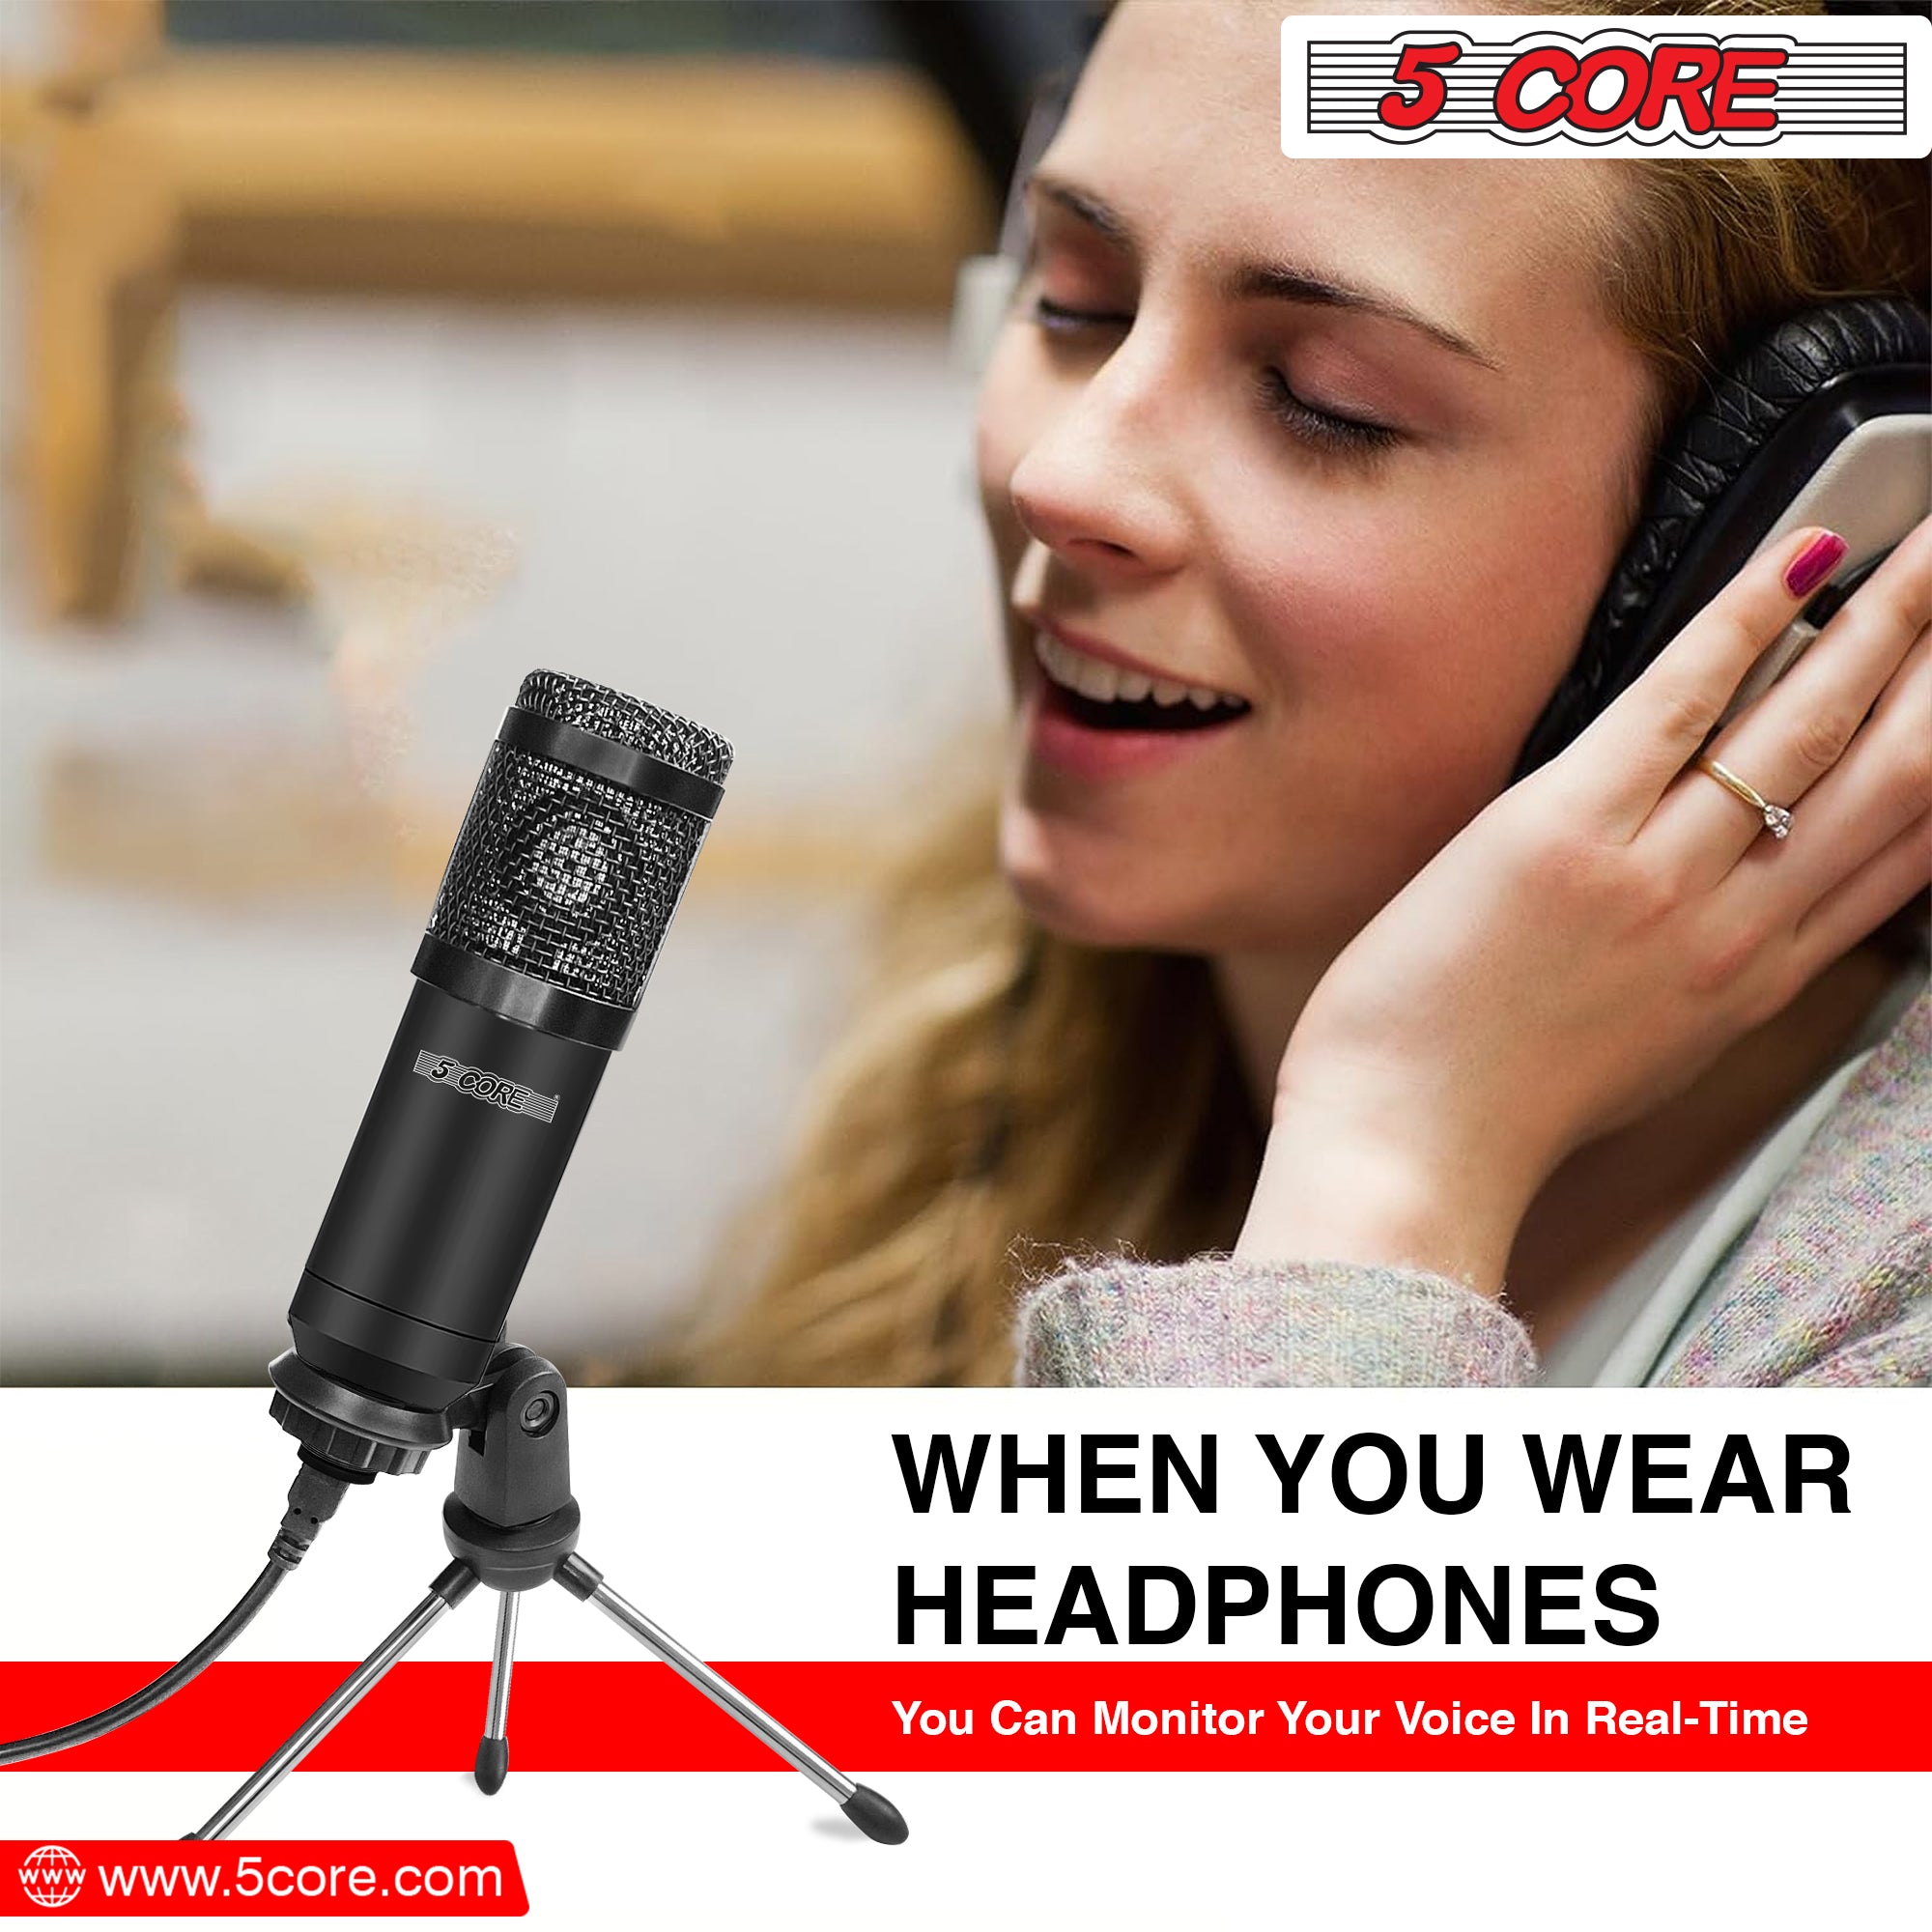 5 Core Podcast Equipment Bundle All in One Podcast Kit w Condenser Microphone Perfect for Recording Broadcasting Live Streaming - RM 4 B